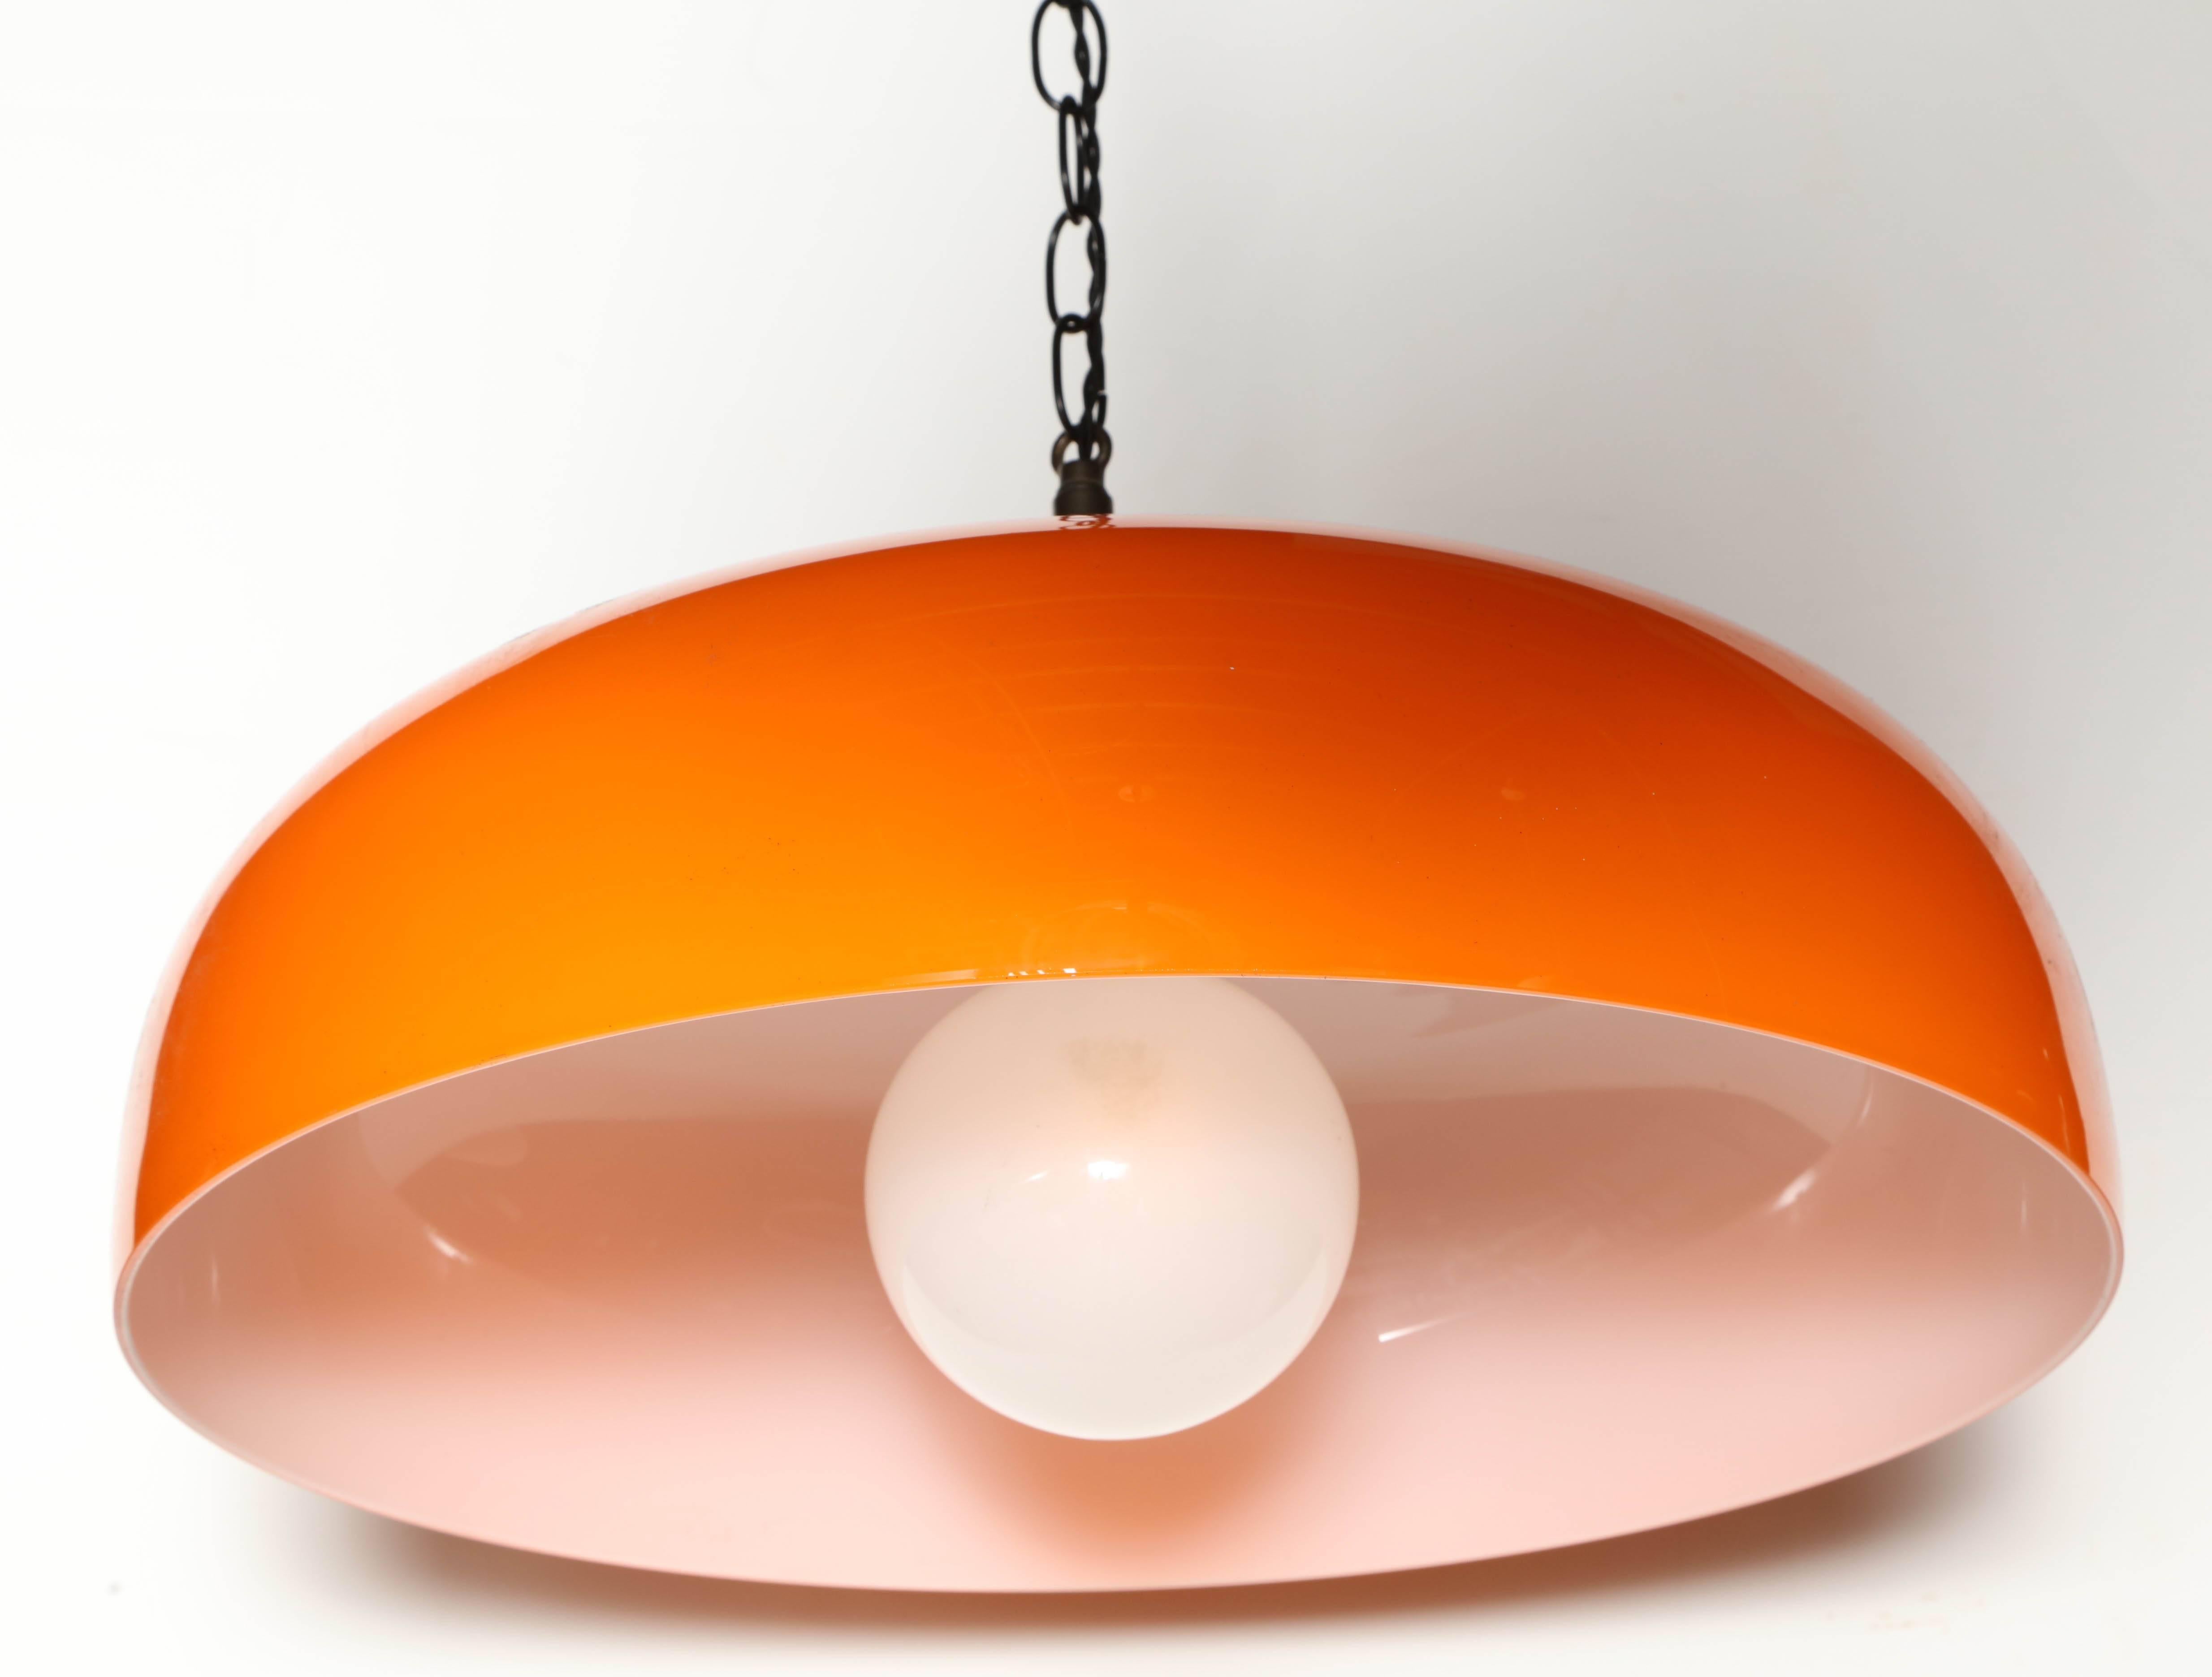 Large Italian Modern Murano Venini Lamp Co. Adjustable Hanging Lamp, circa 1950's. Featuring a large bell shaped cased glass shade with Orange exterior and White interior. Shown with Decorator bulb.  Kitchen. Casual dining. Game Room.  Made in